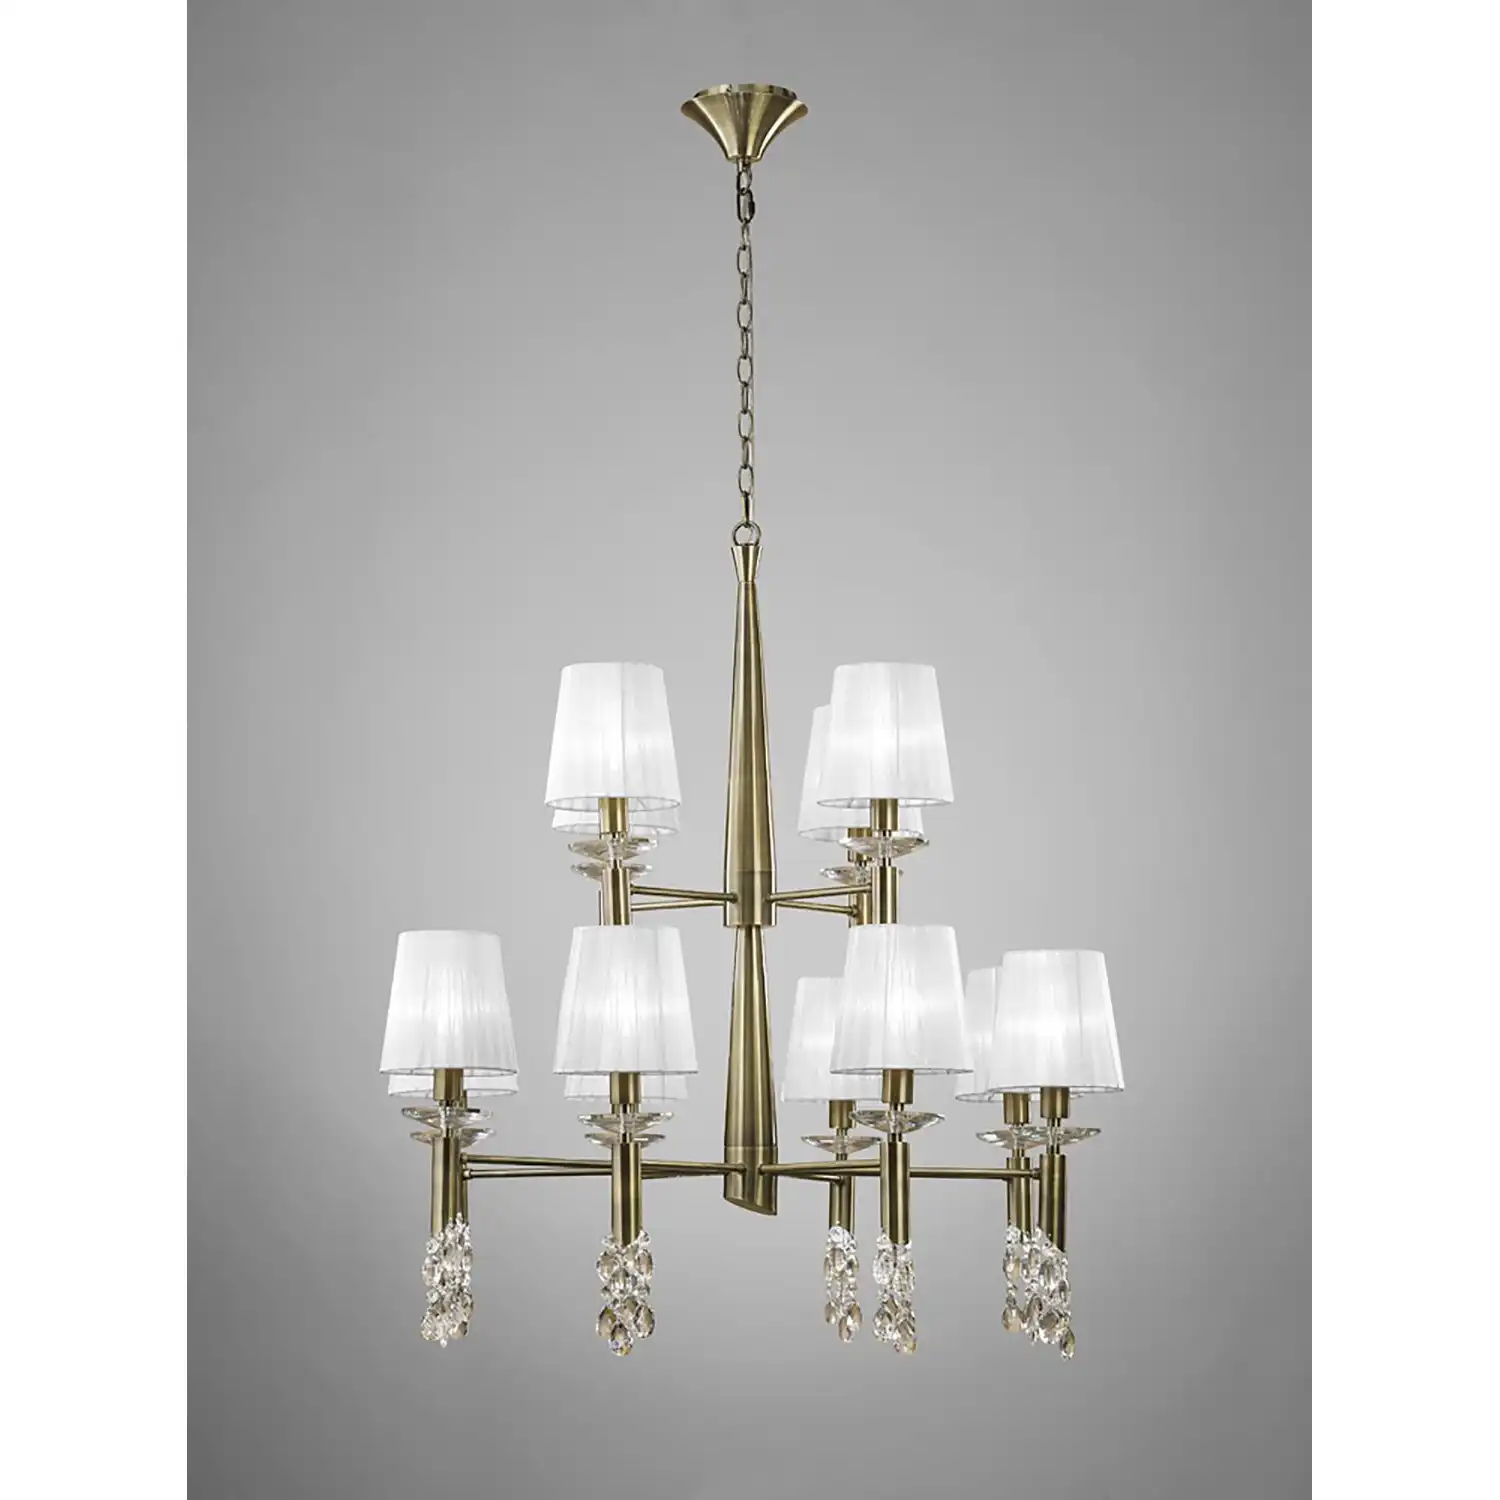 Tiffany Pendant 2 Tier 12+12 Light E14+G9, Antique Brass With White Shades And Clear Crystal